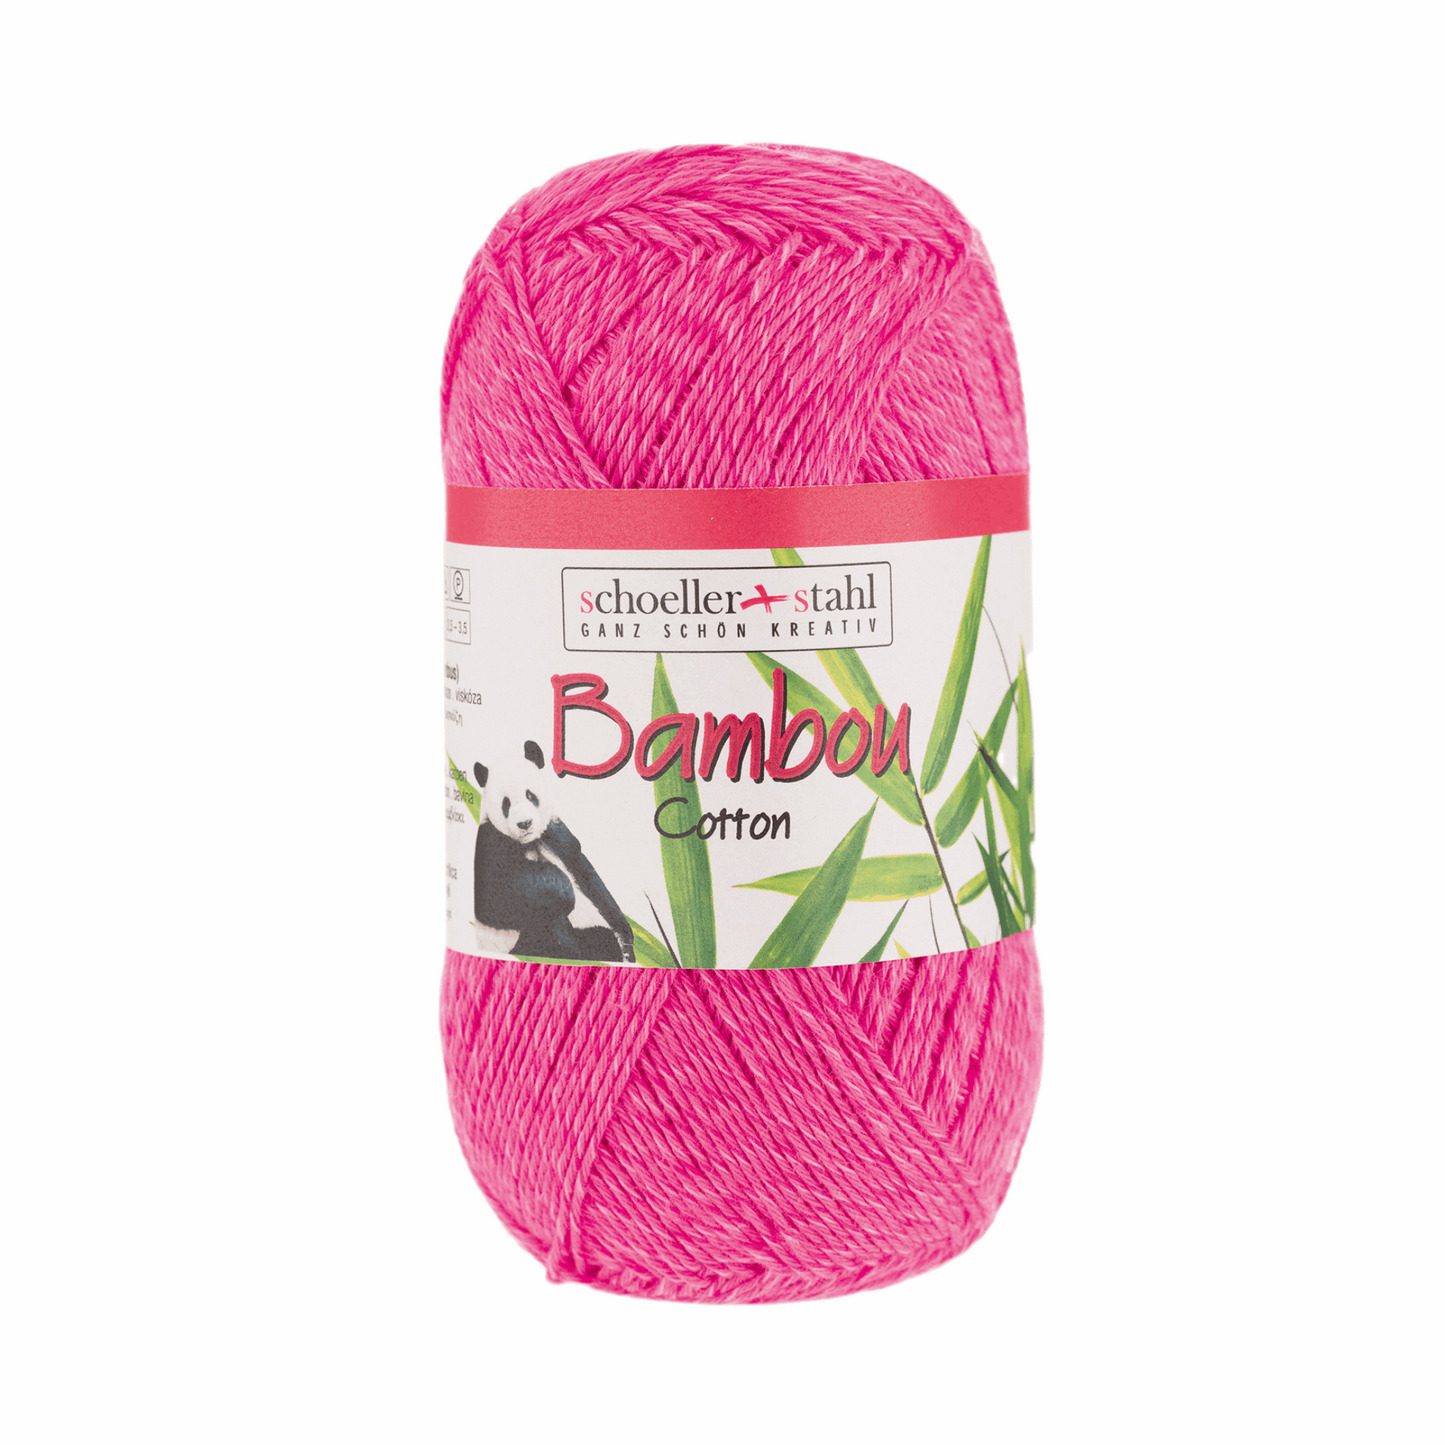 Bambou Cotton 100g, 90286, Farbe 7, pink